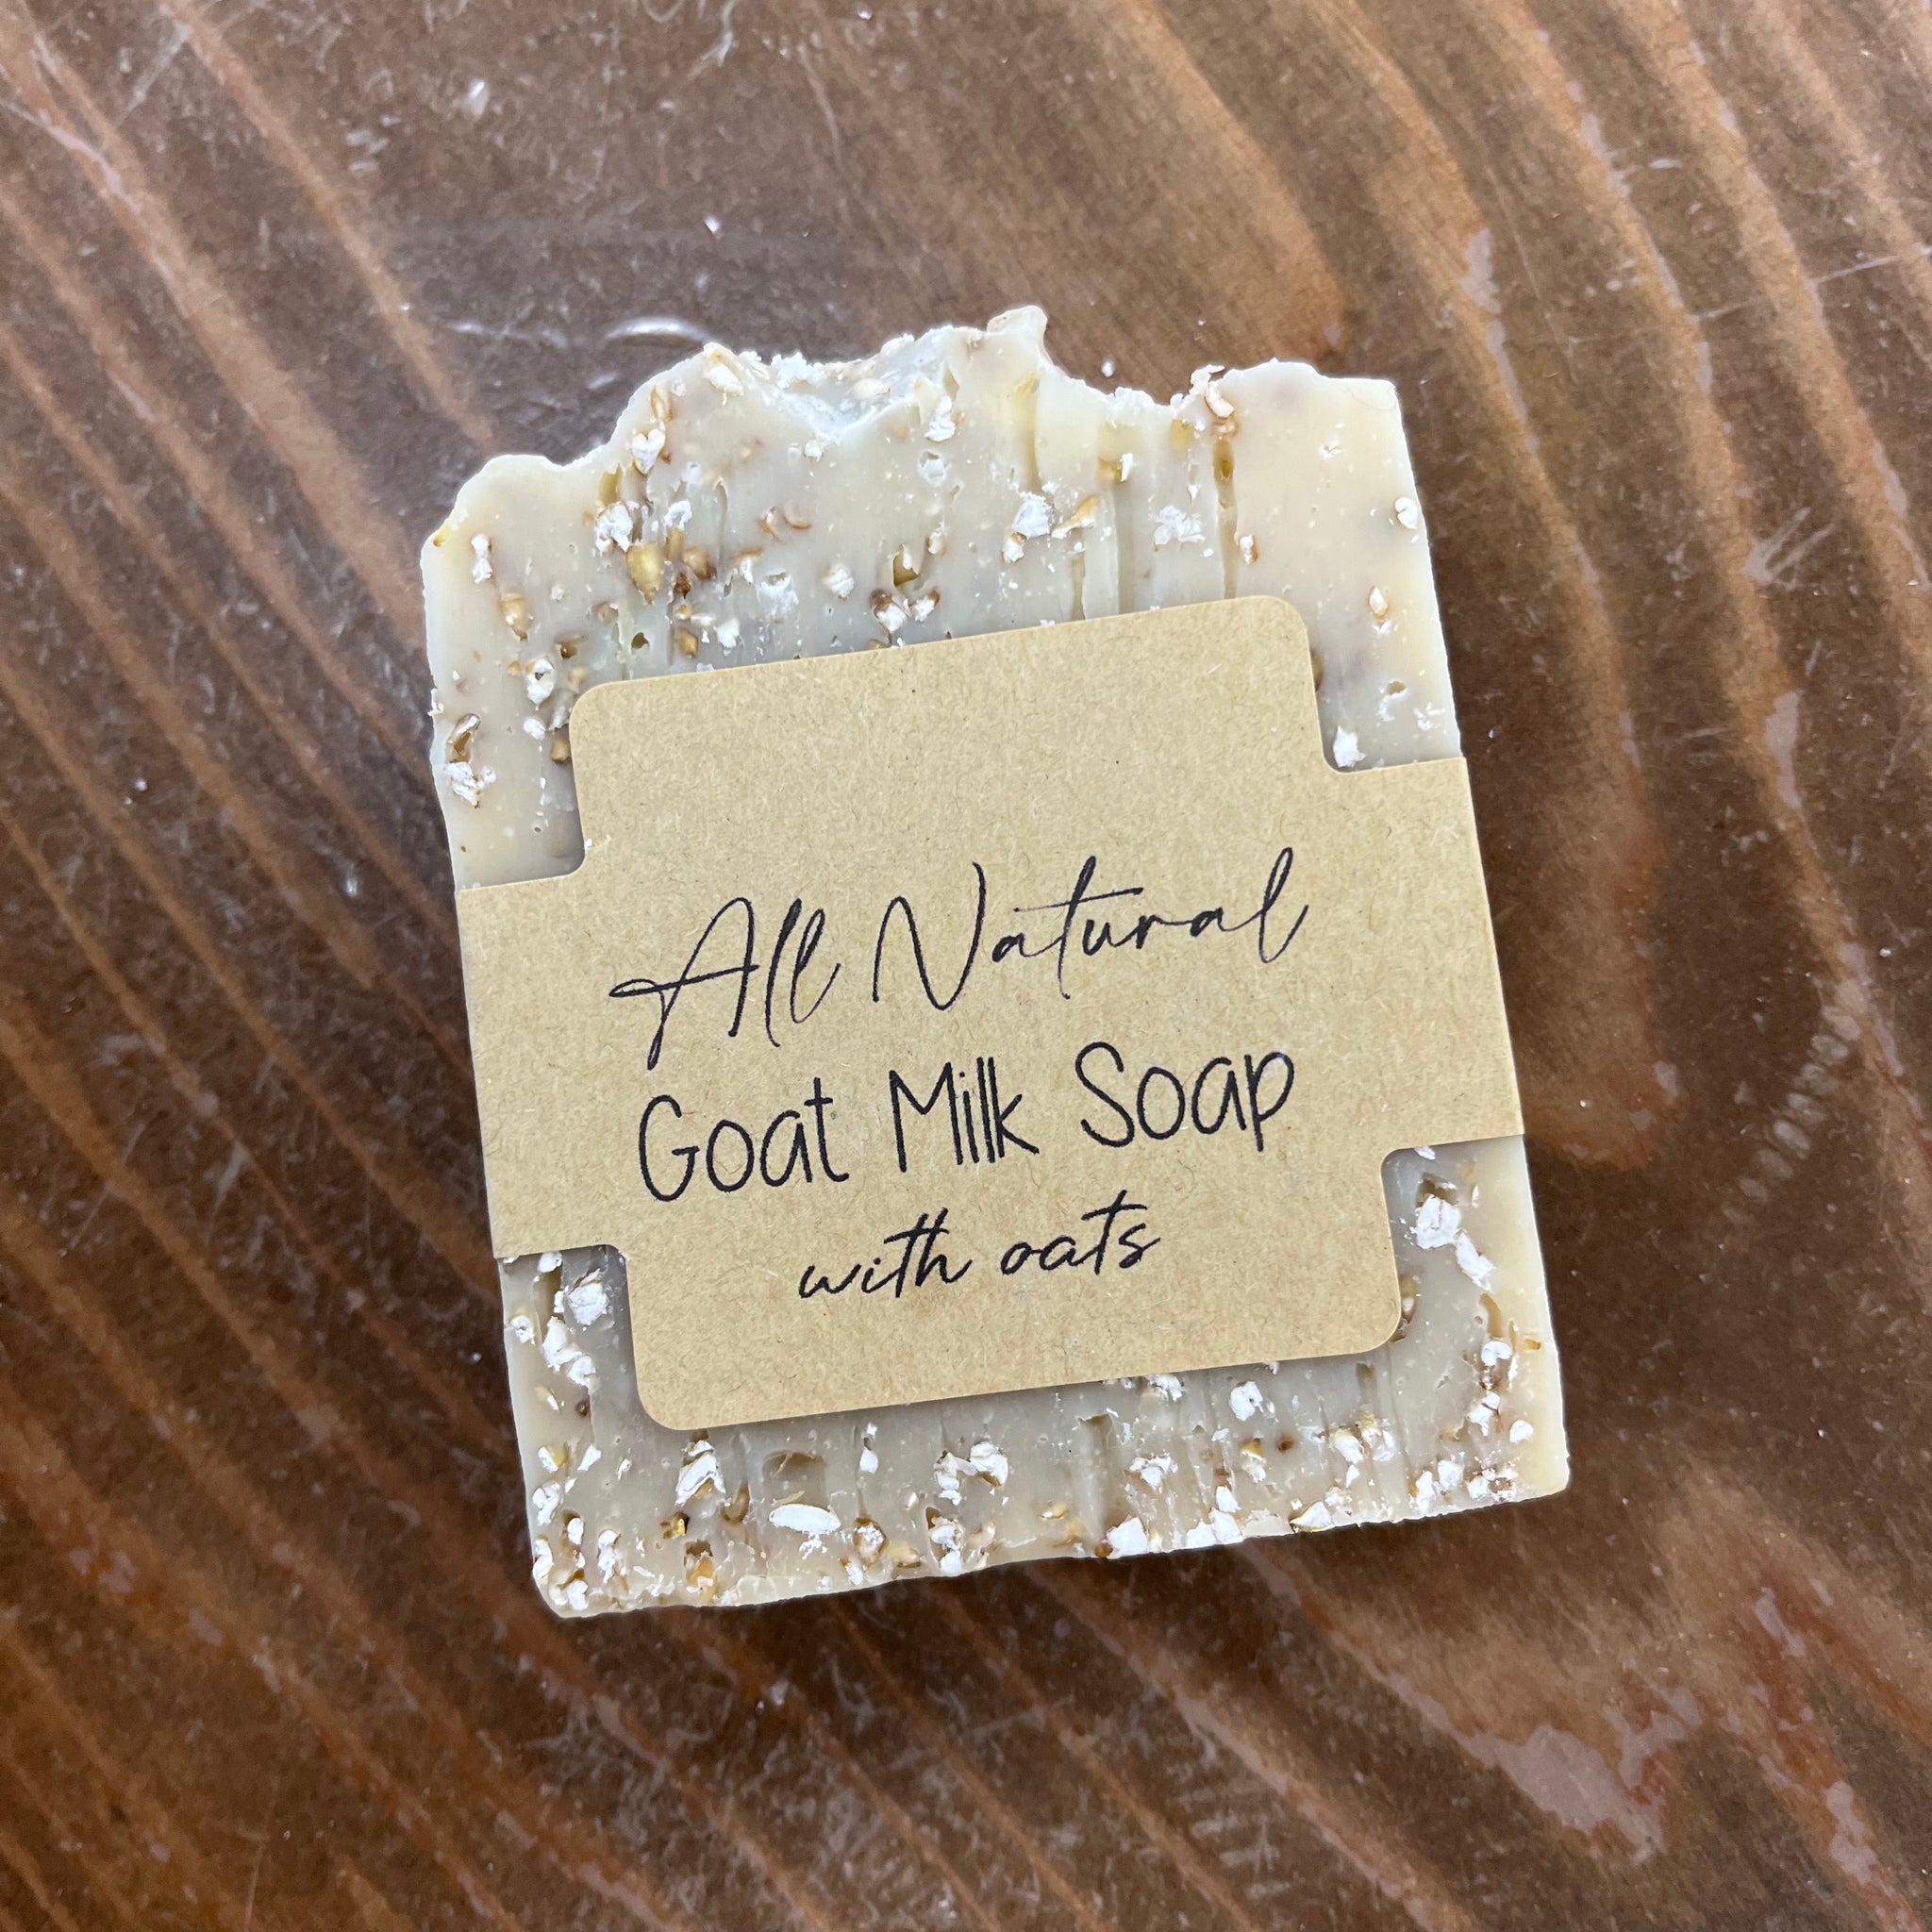 Eucalyptus Doula - All Natural Goat Milk Soap With Oats